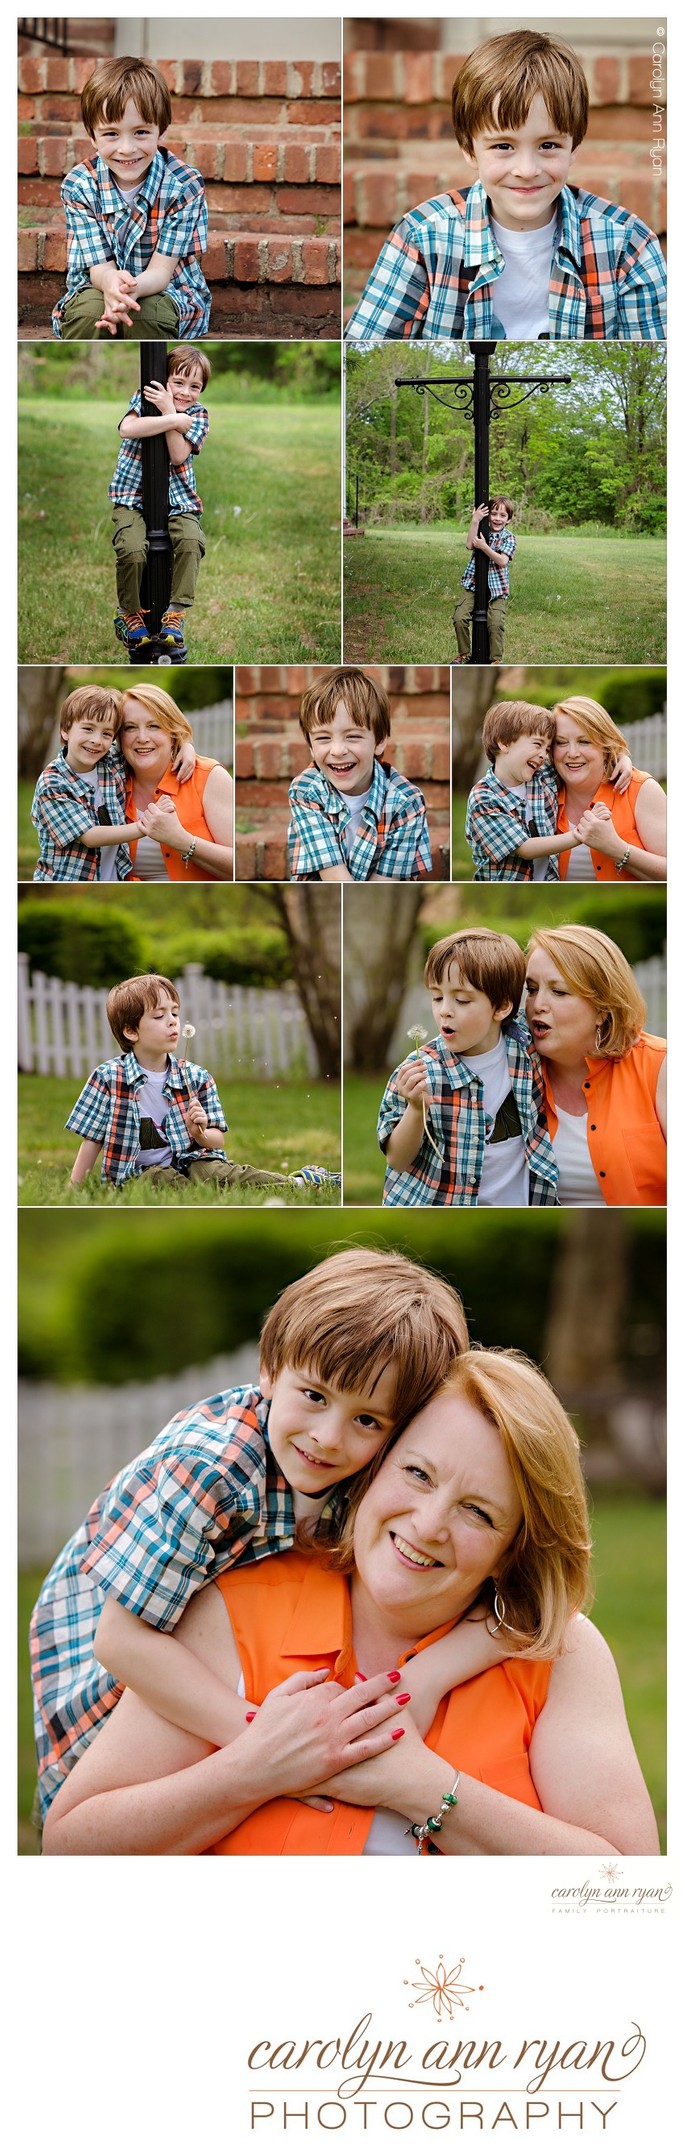 Orange and Blue Colorful Family Portraits Charlotte